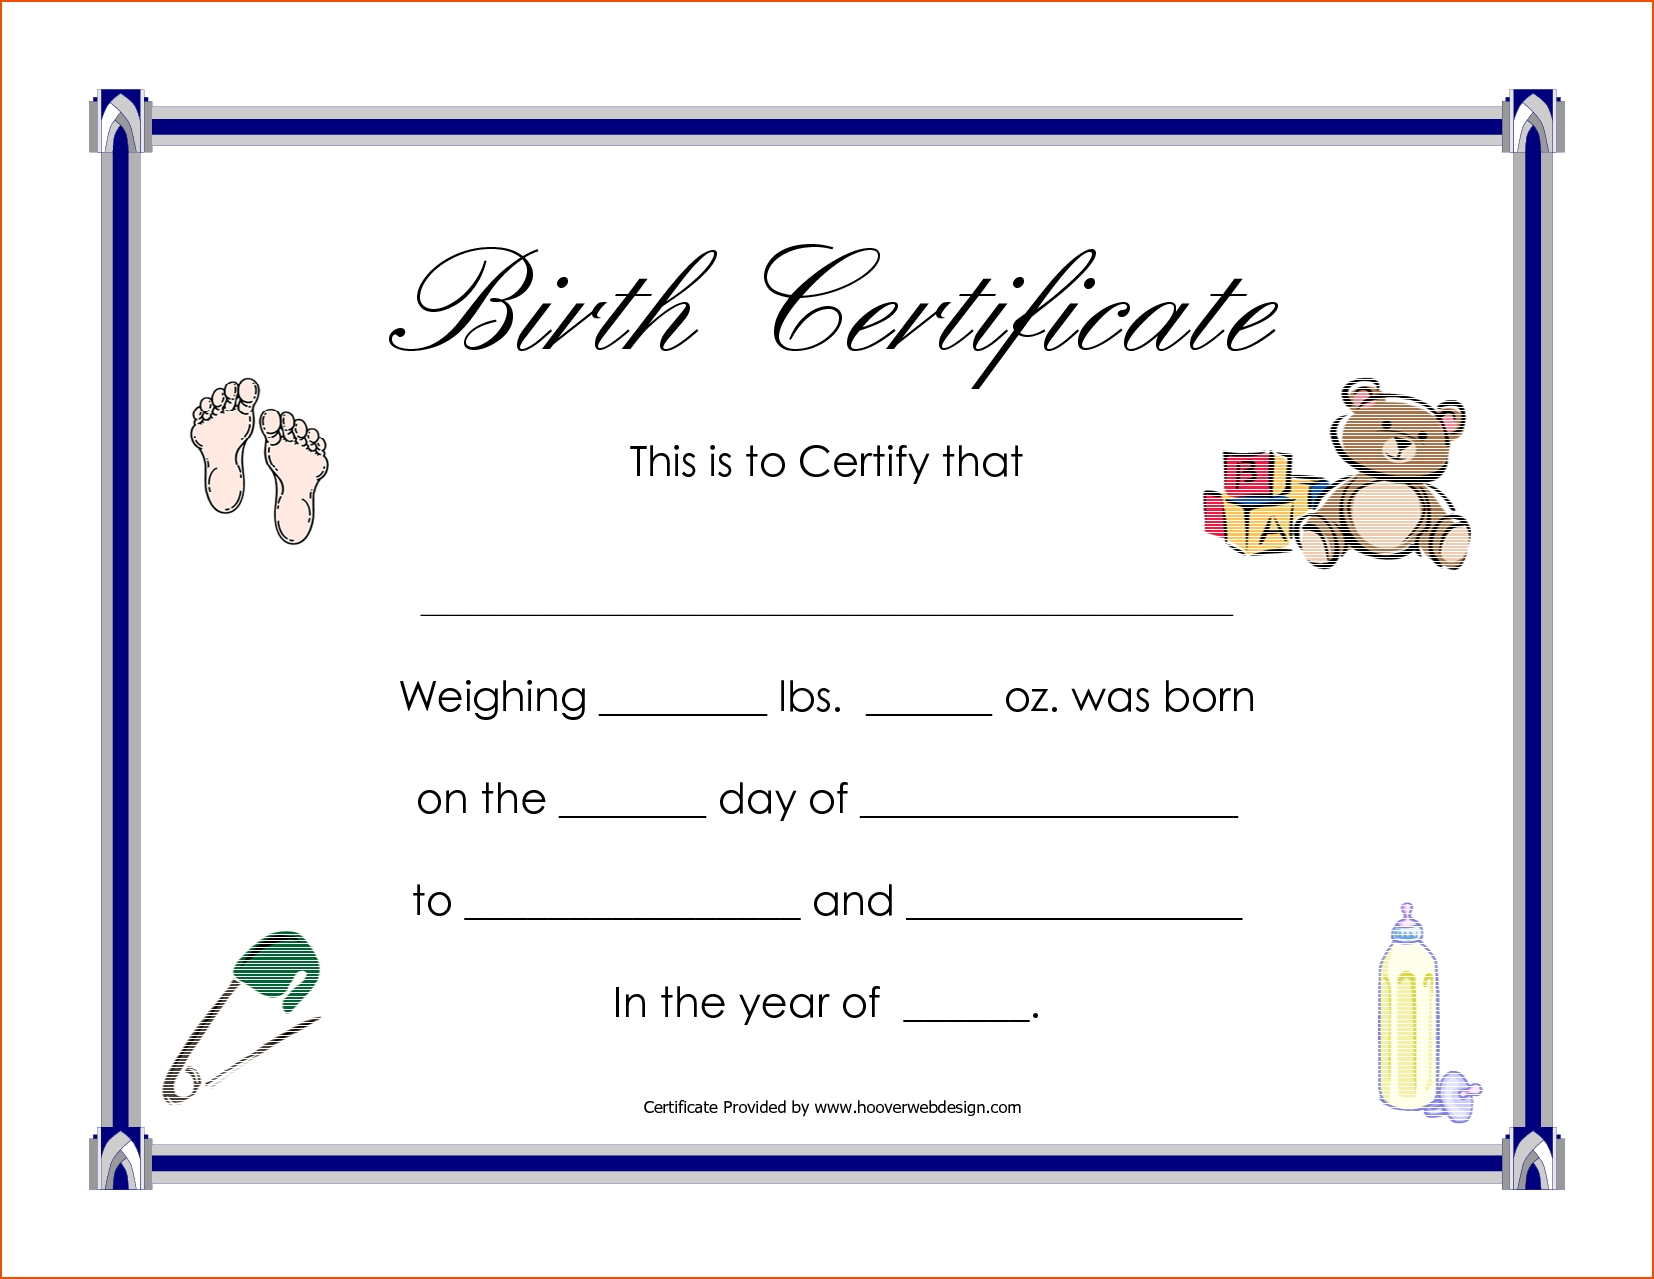 A Birth Certificate Template | Safebest.xyz In Birth Certificate Templates For Word